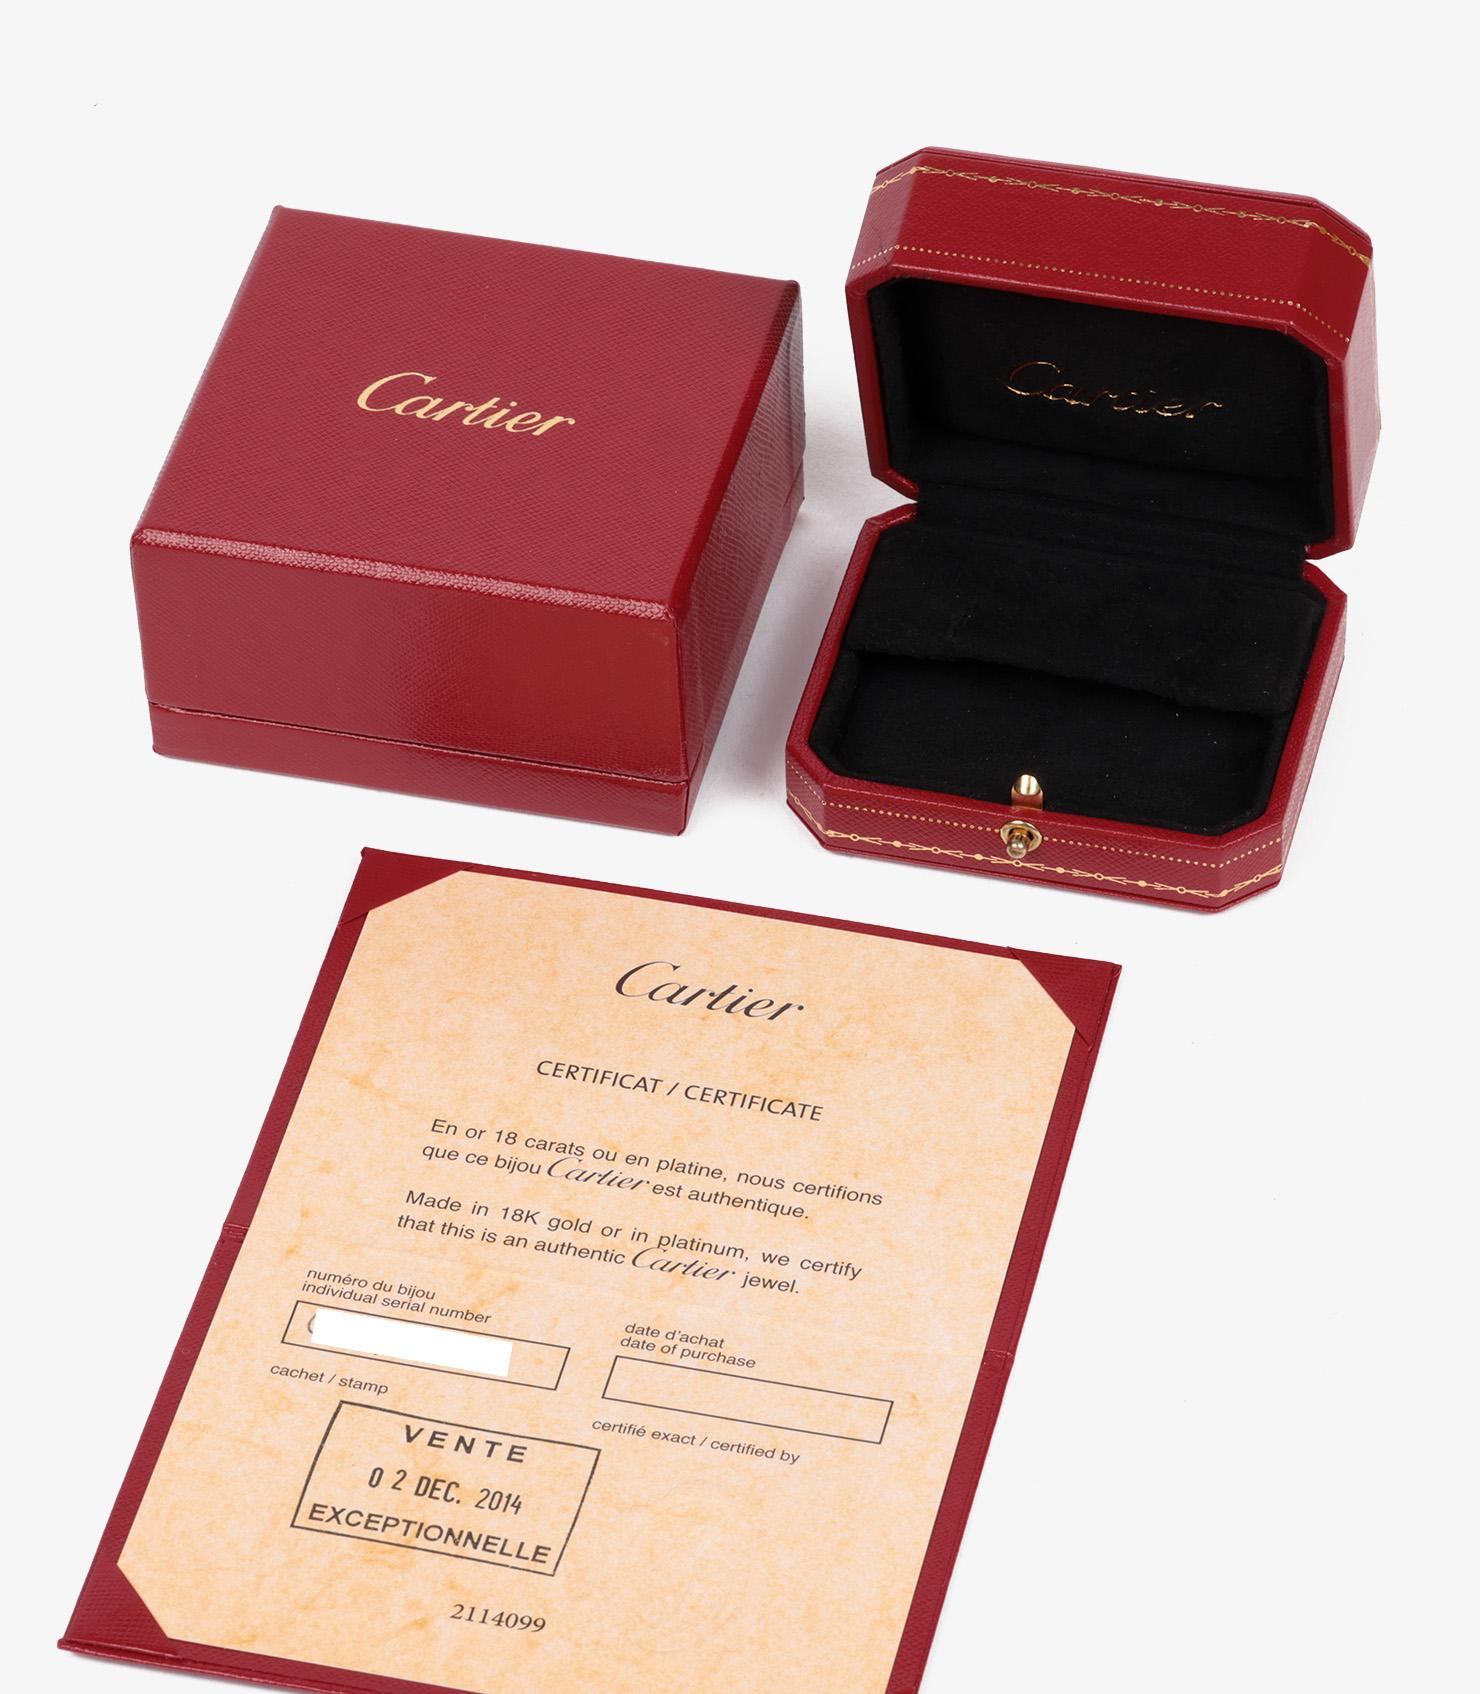 Cartier Diamond Set 18ct White Gold, 18ct Yellow Gold And 18ct Rose Gold Hoop Earrings

Brand- Cartier
Model- Diamond Trinity Hoop Earrings
Product Type- Earrings
Serial Number- WQ****
Age- Circa 2014
Accompanied By- Cartier Box,